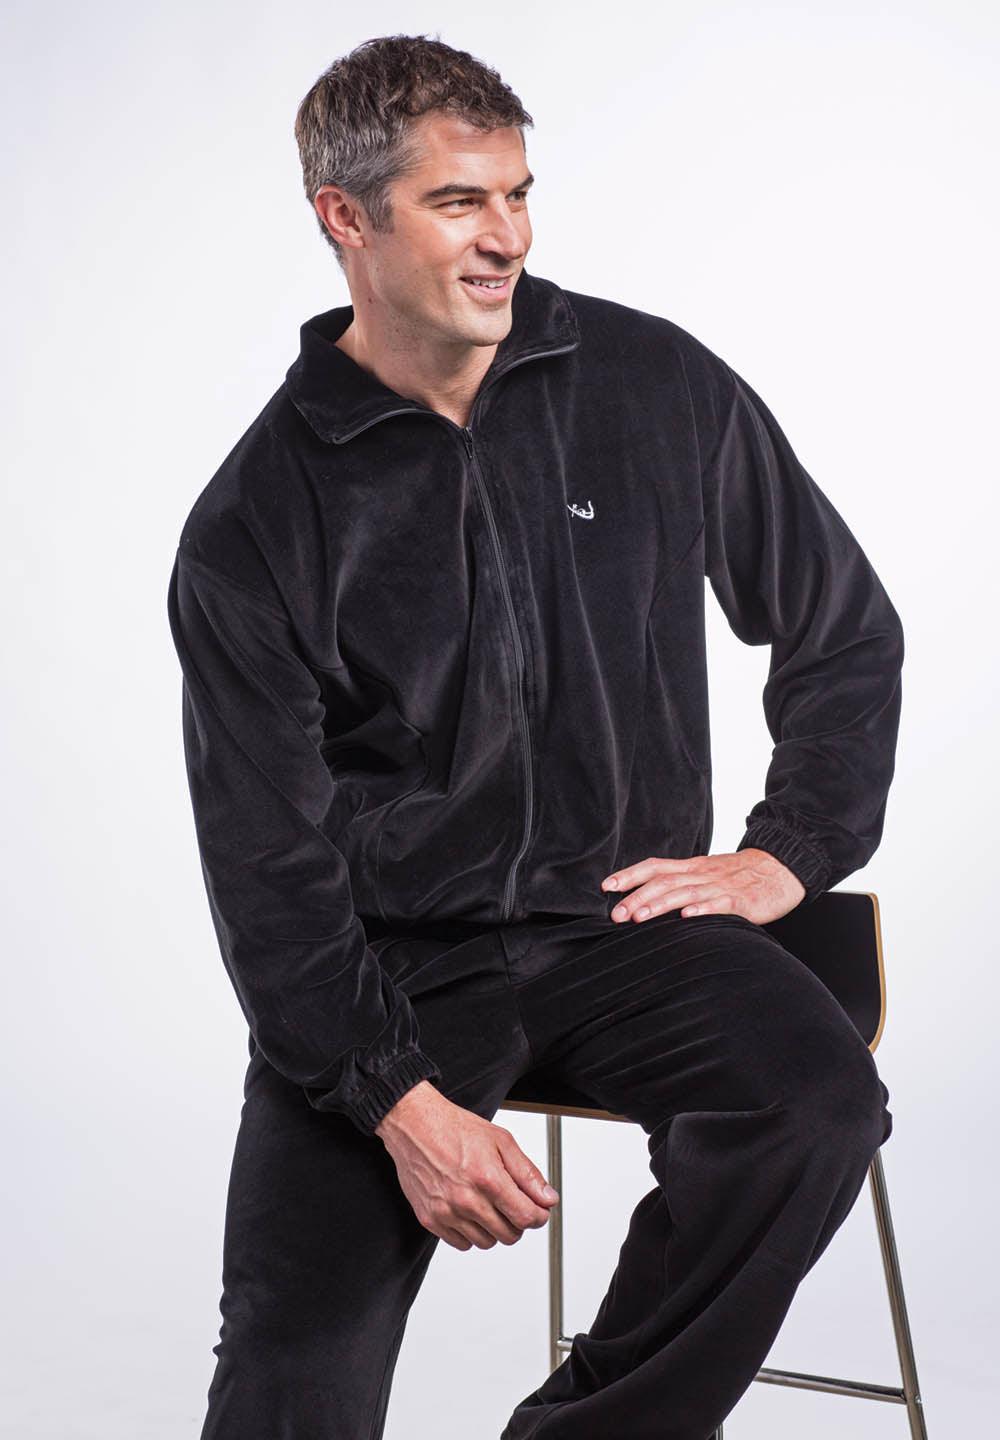 Microfiber velour fabric is outstanding. Chromed zipper detailing adds sophistication. Classic jacket style with side slash pockets and full zip, great for layering. Pant features a stretch waist band, tie front and classic pockets. Pants feature an open bottom. Made in Italy.